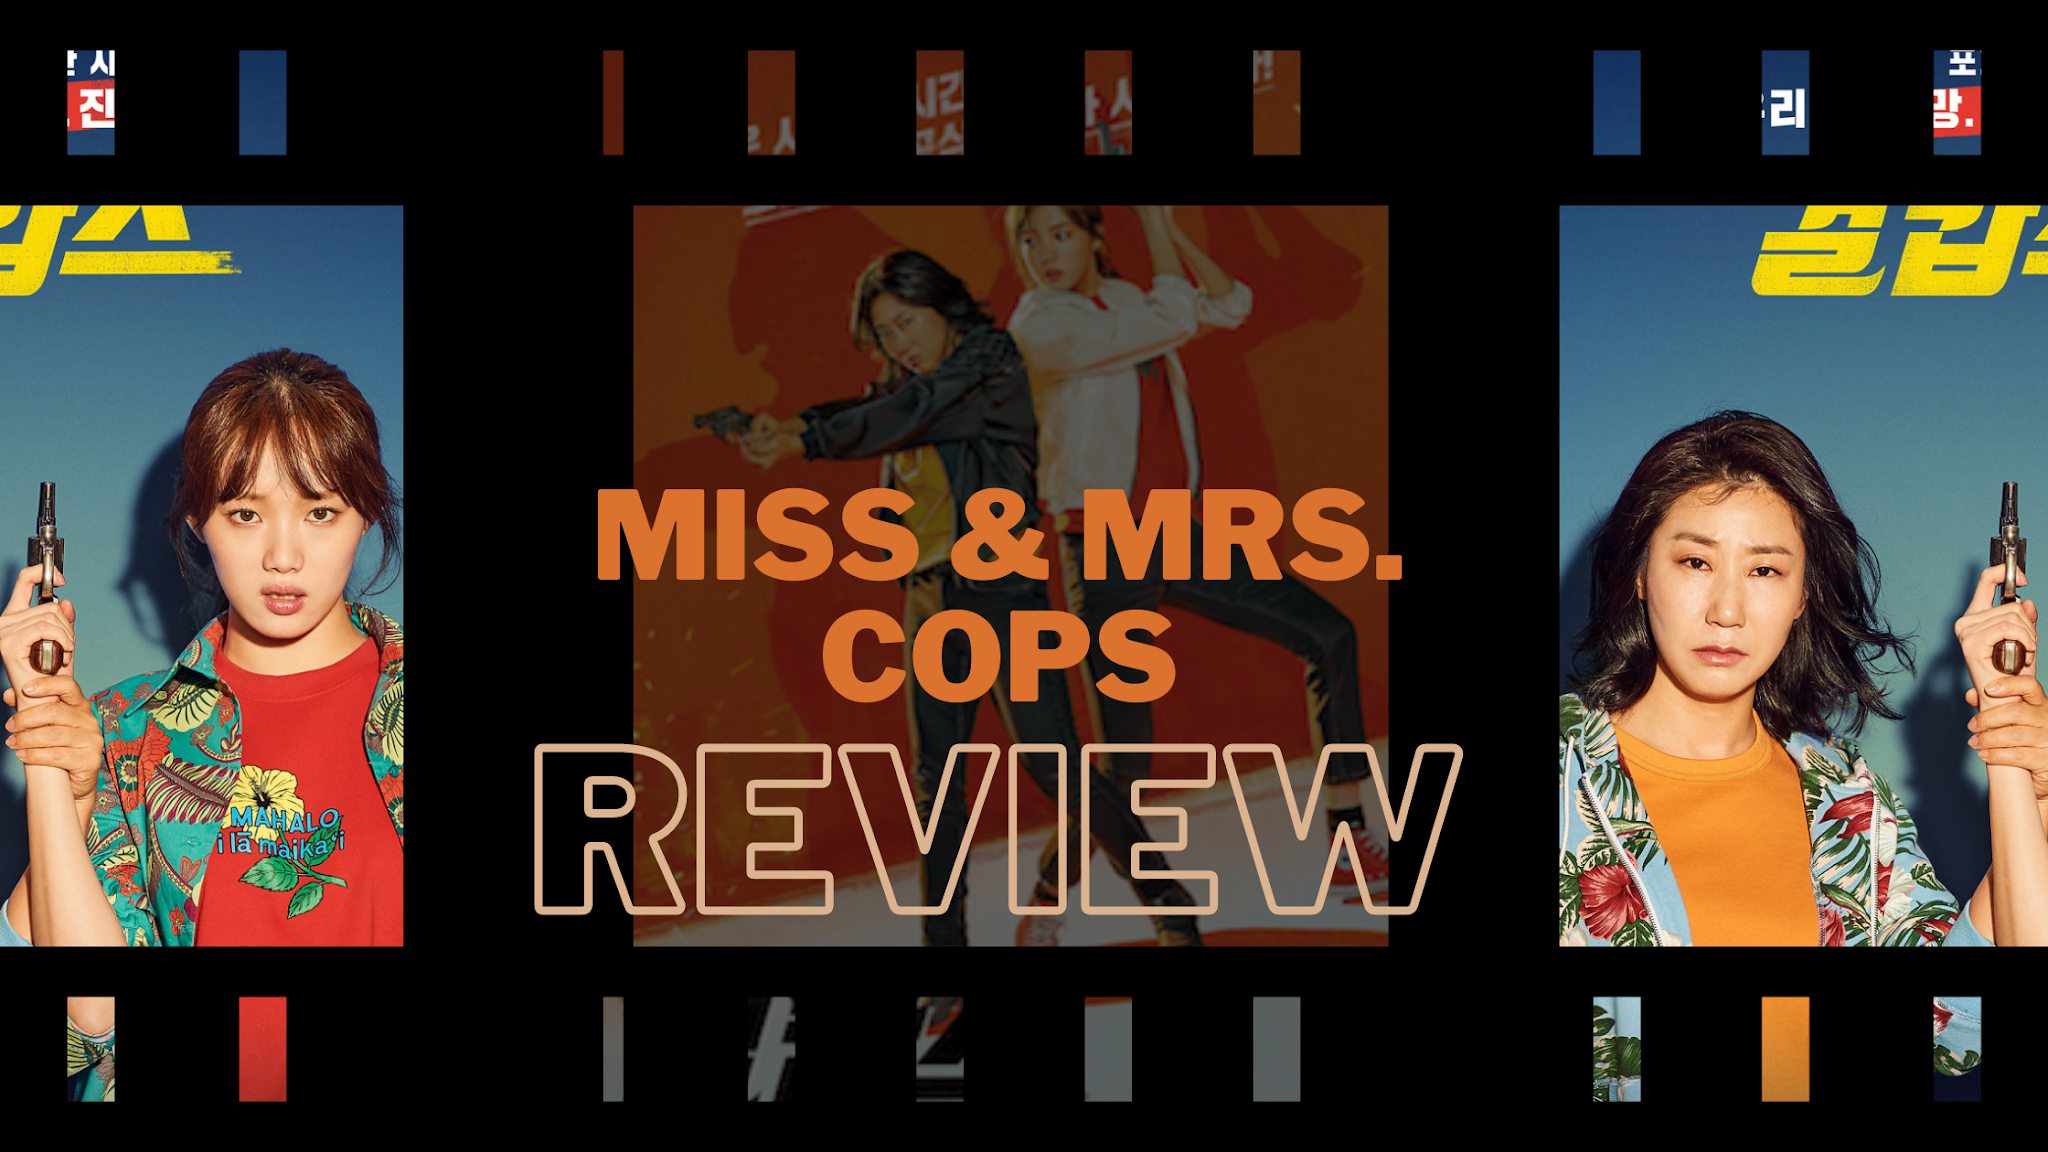 Mrs and miss cop